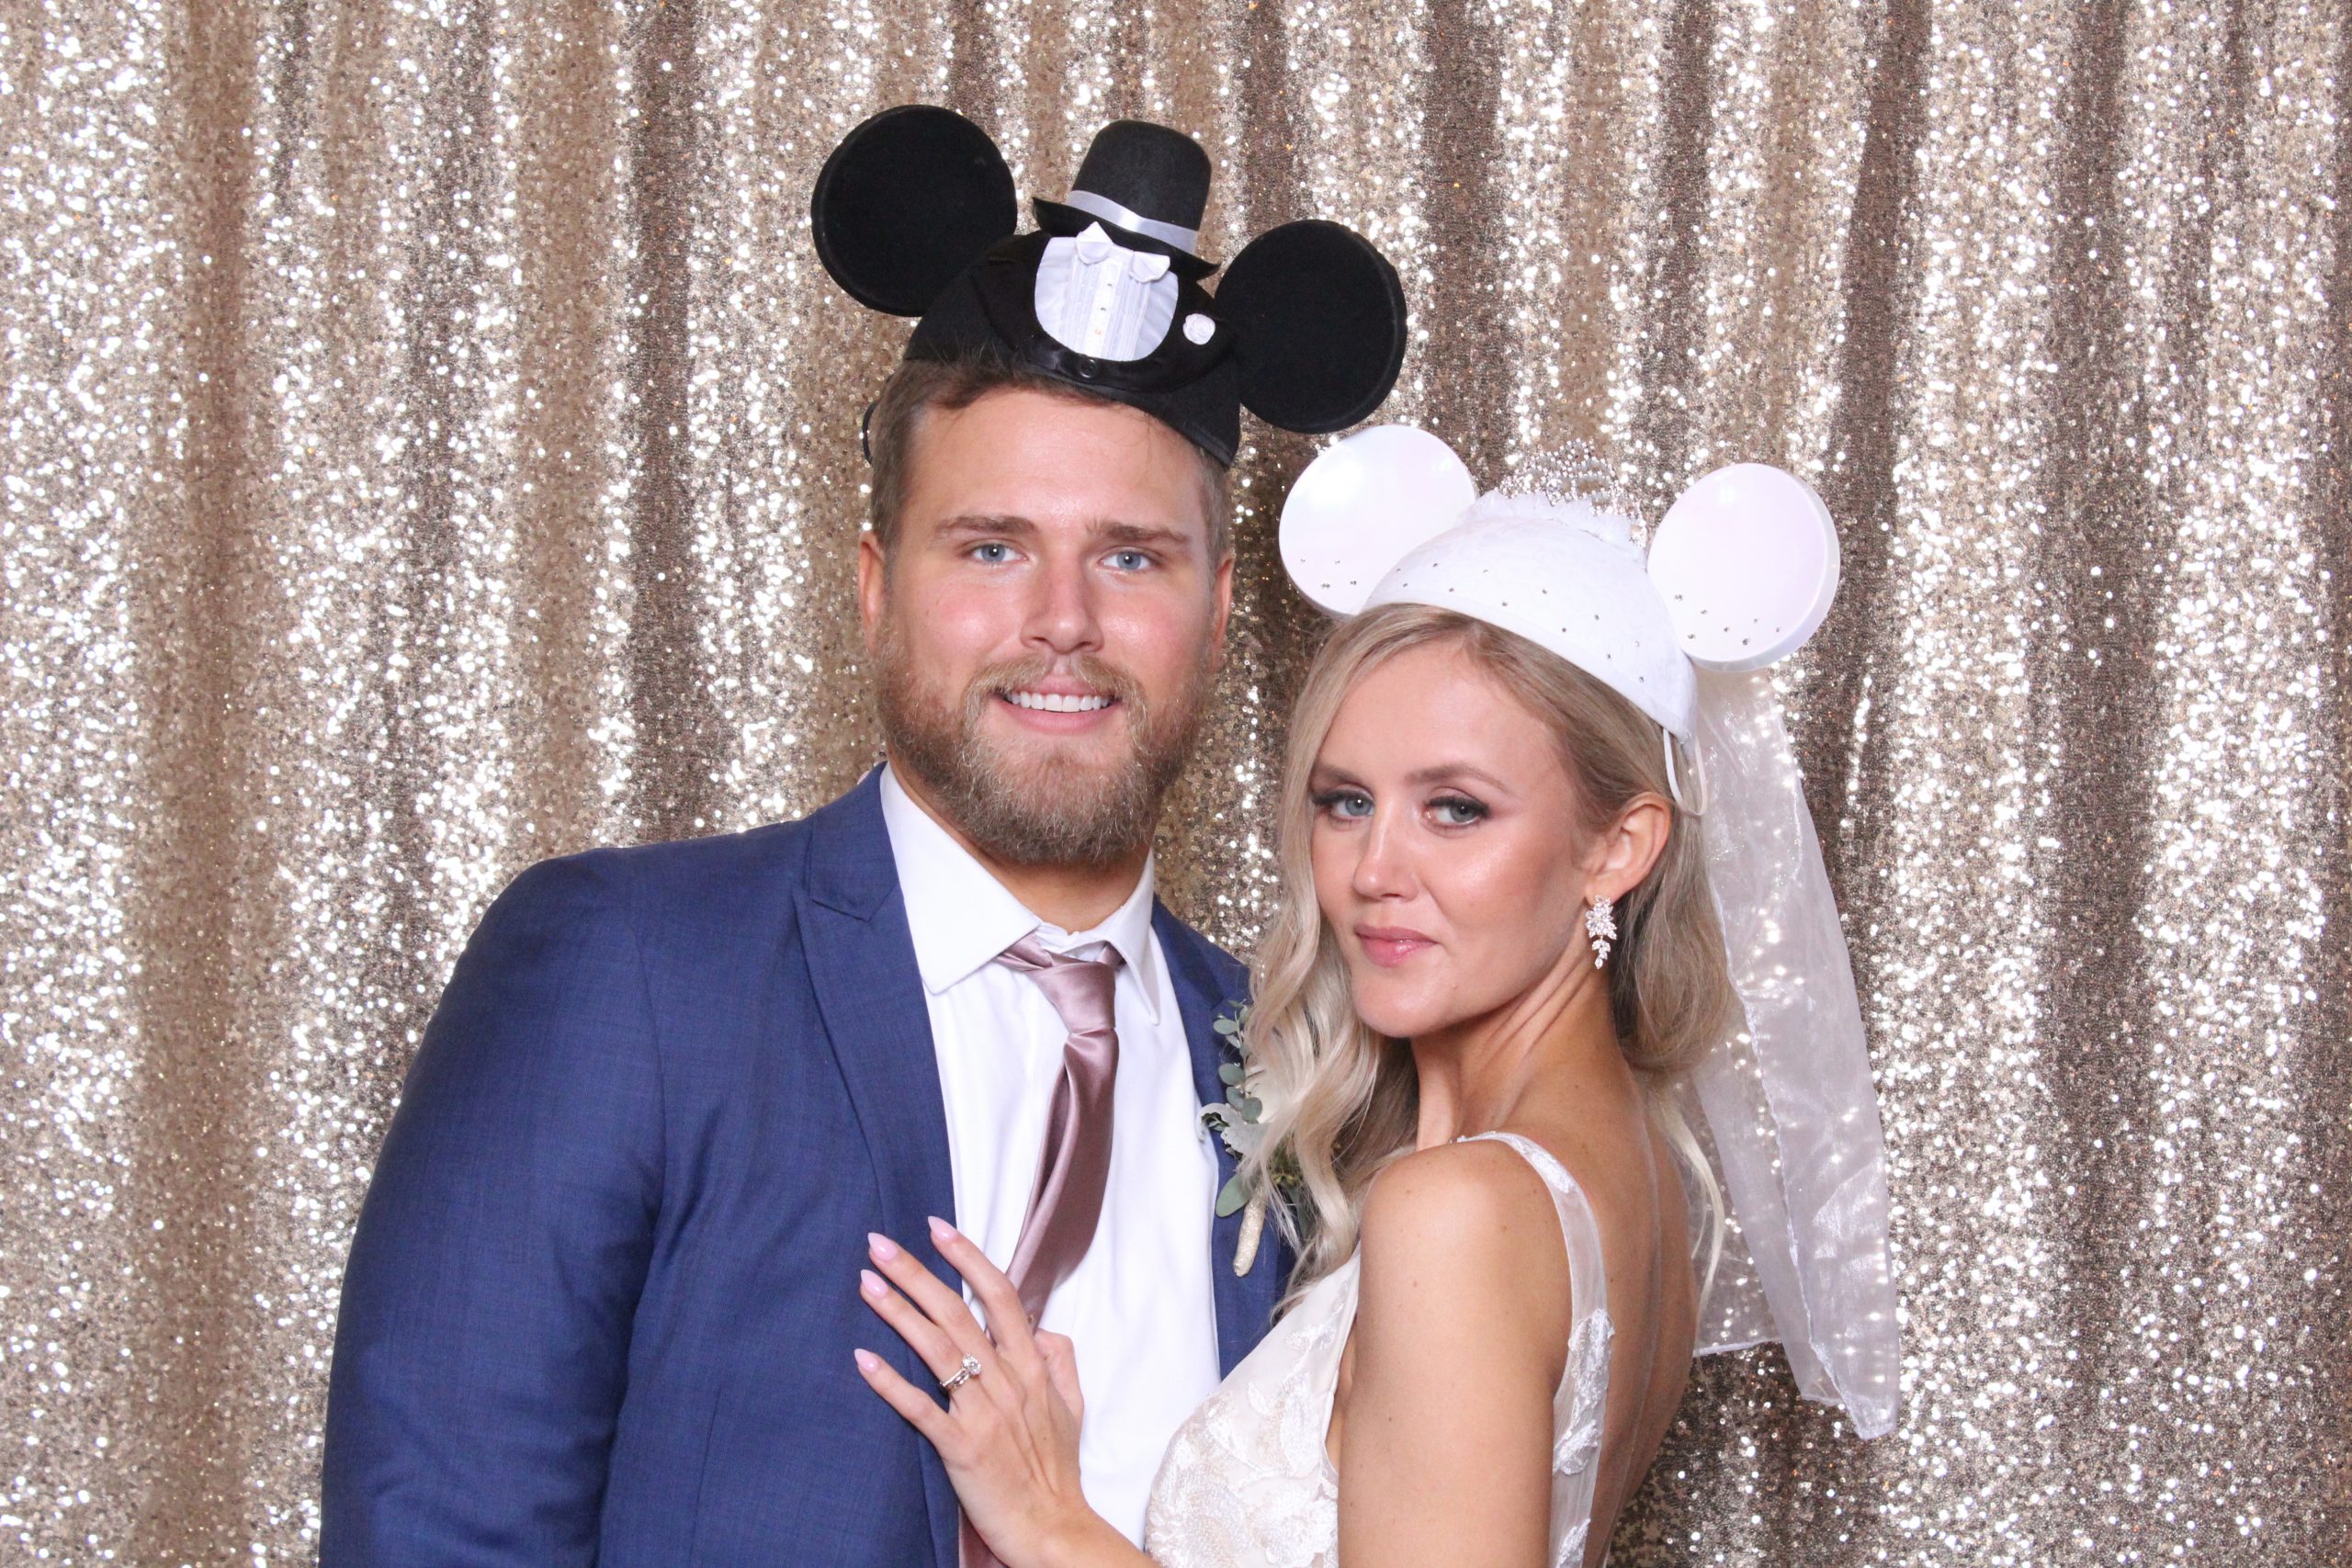 Party Shots Orlando Photo Booth Bride and Groom with Minnie and Mickey Prop hats